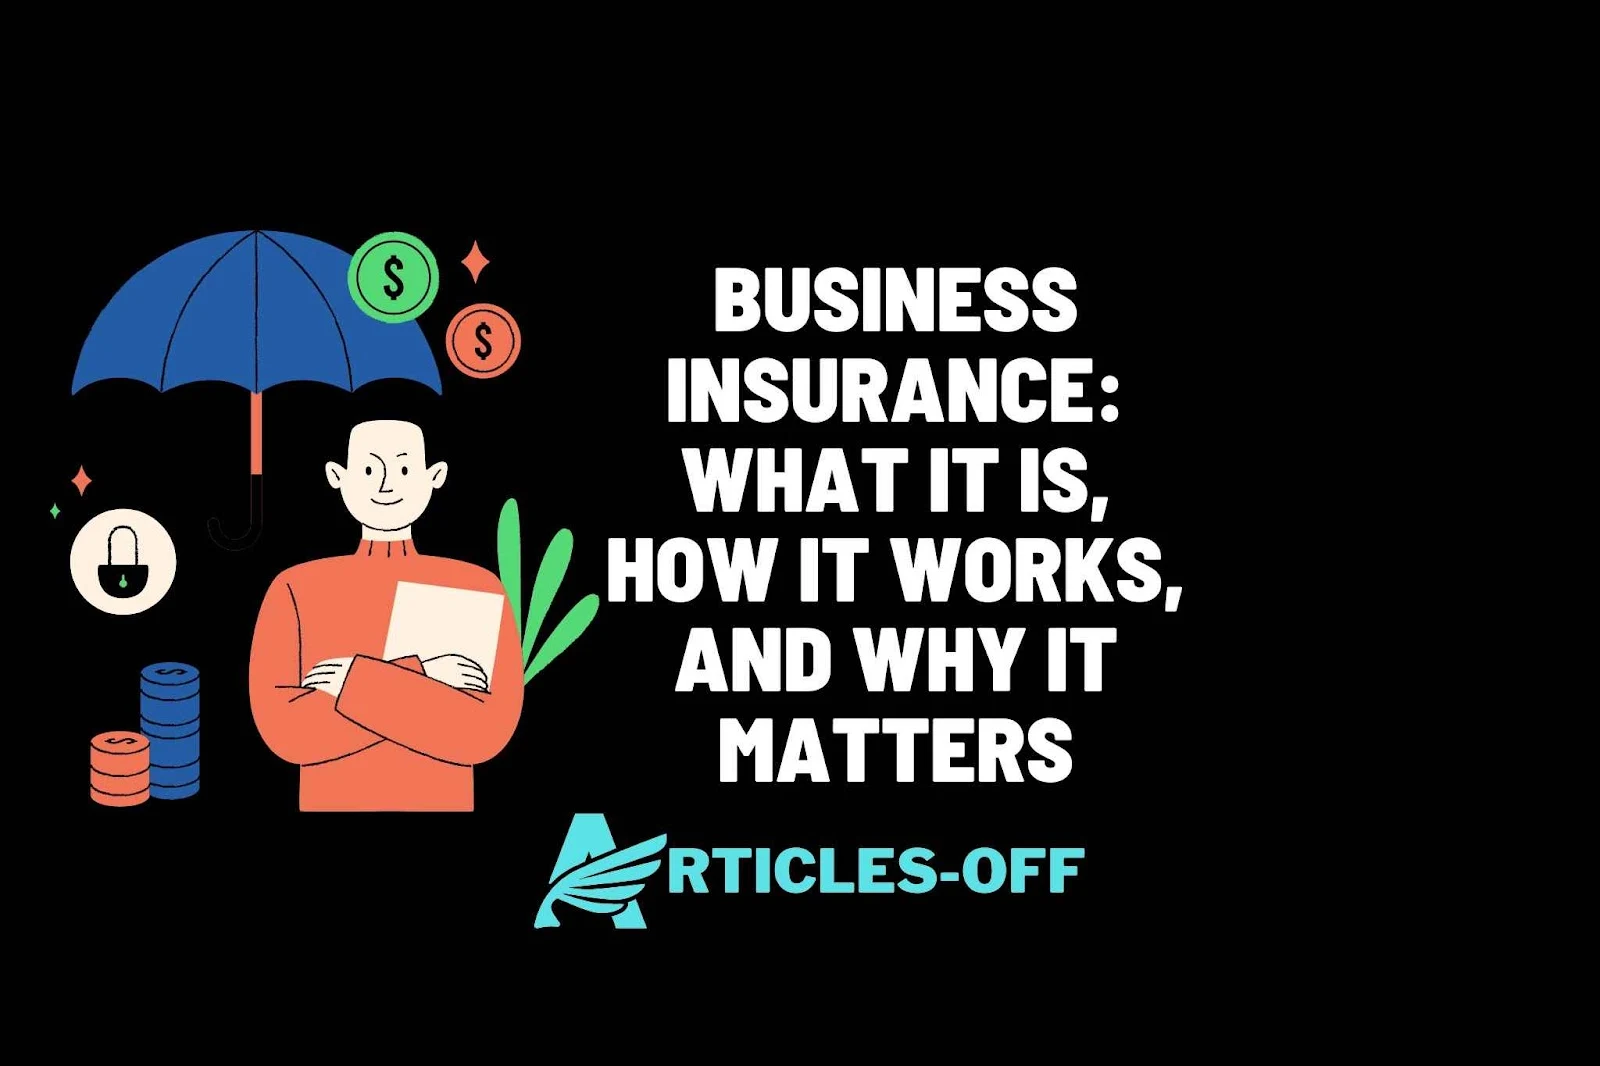 small business insurance,business insurance for llc,business insurance coverage,business insurance price